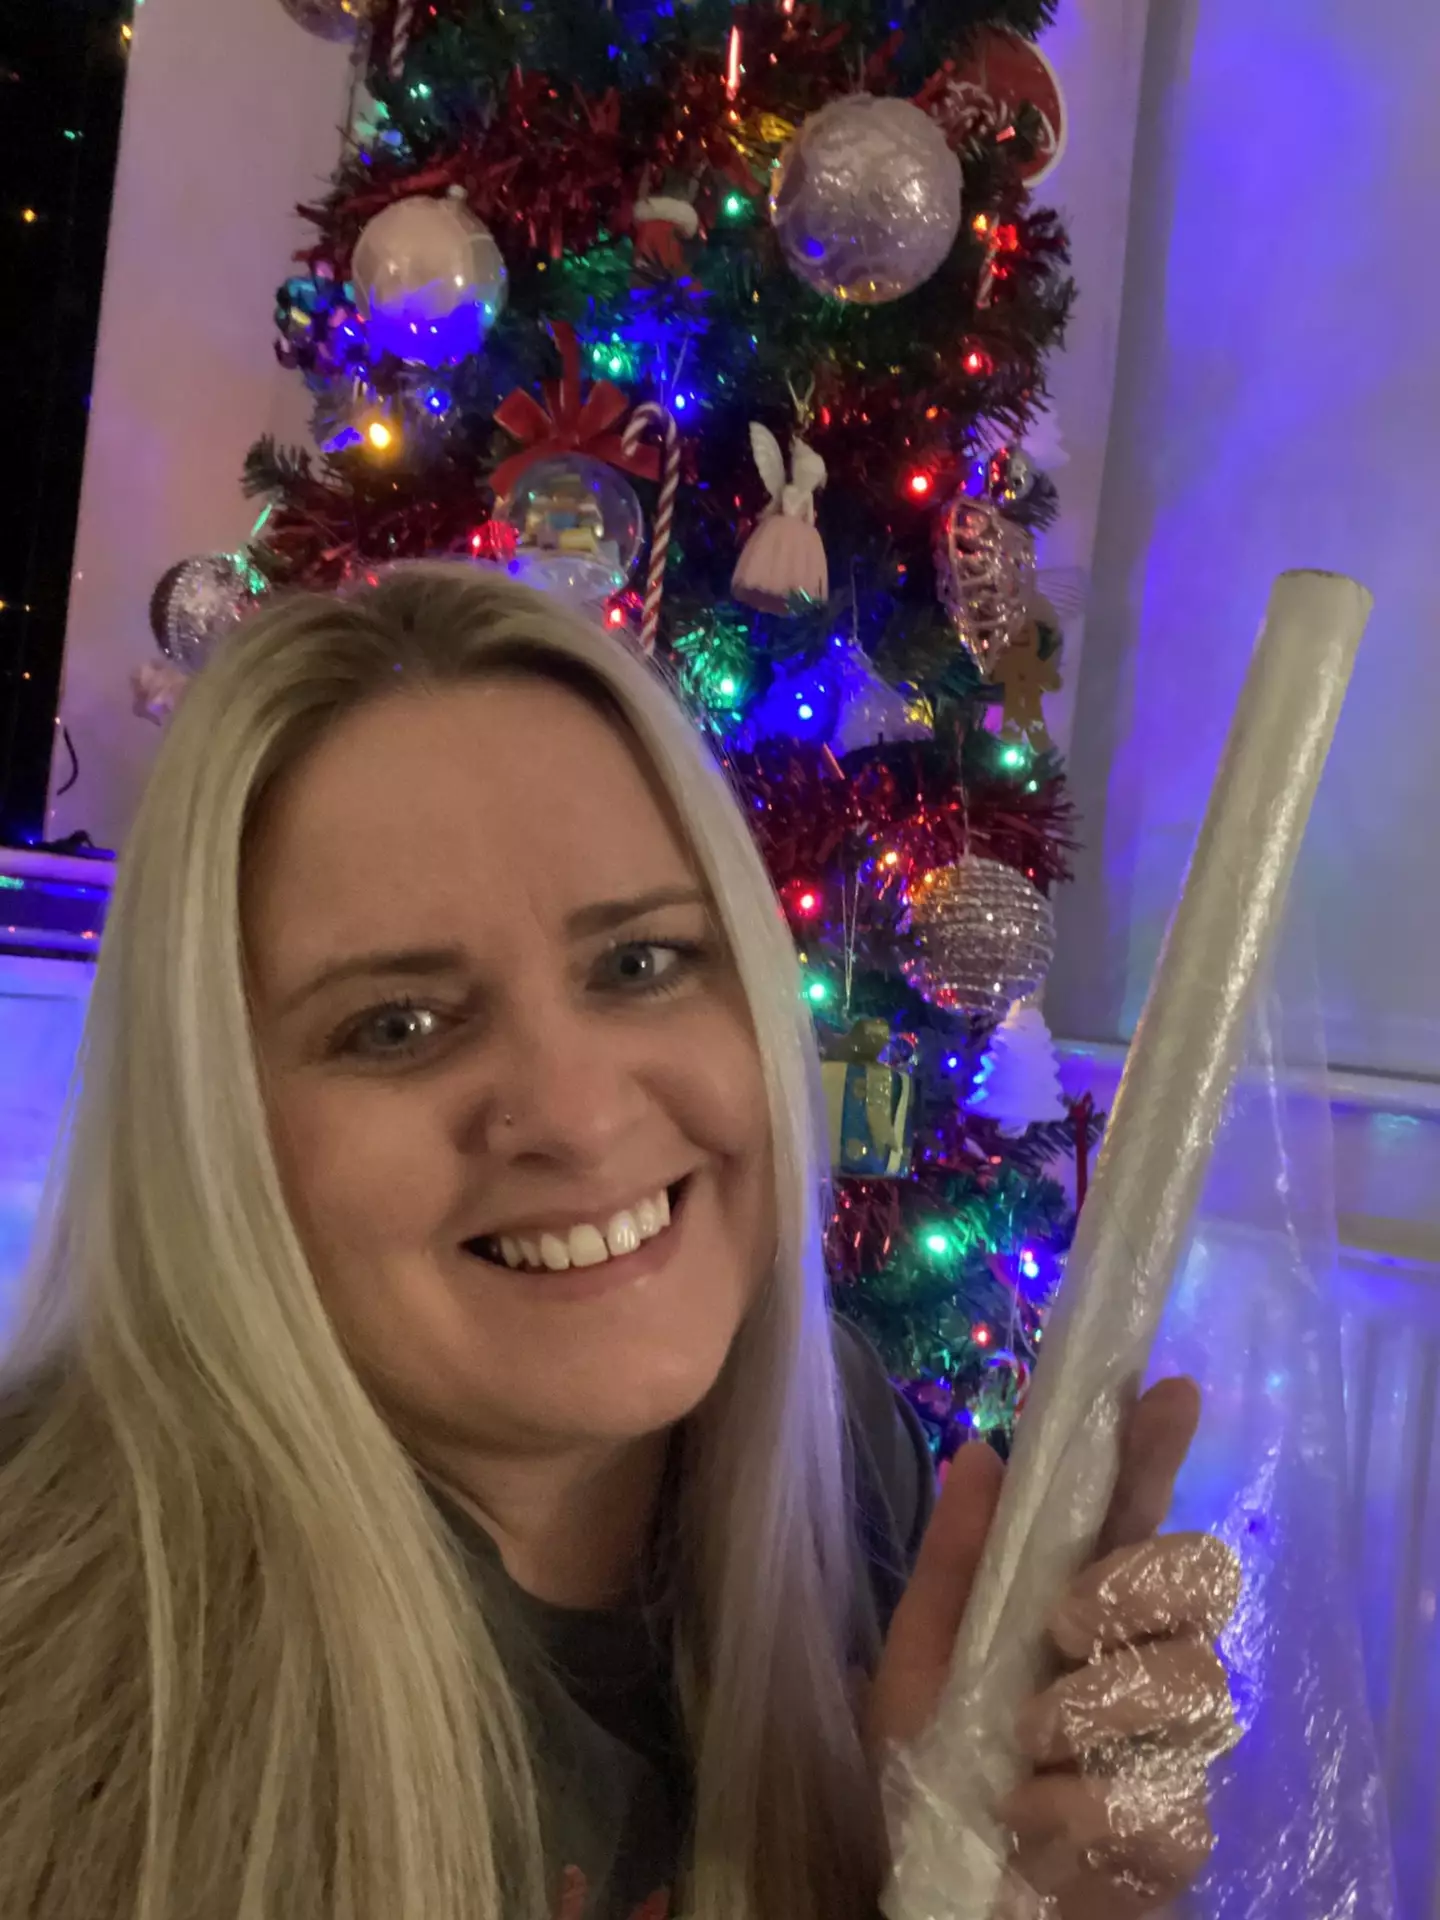 One mum's clever hack means a roll of cling film can preserve your perfect Christmas tree year after year.